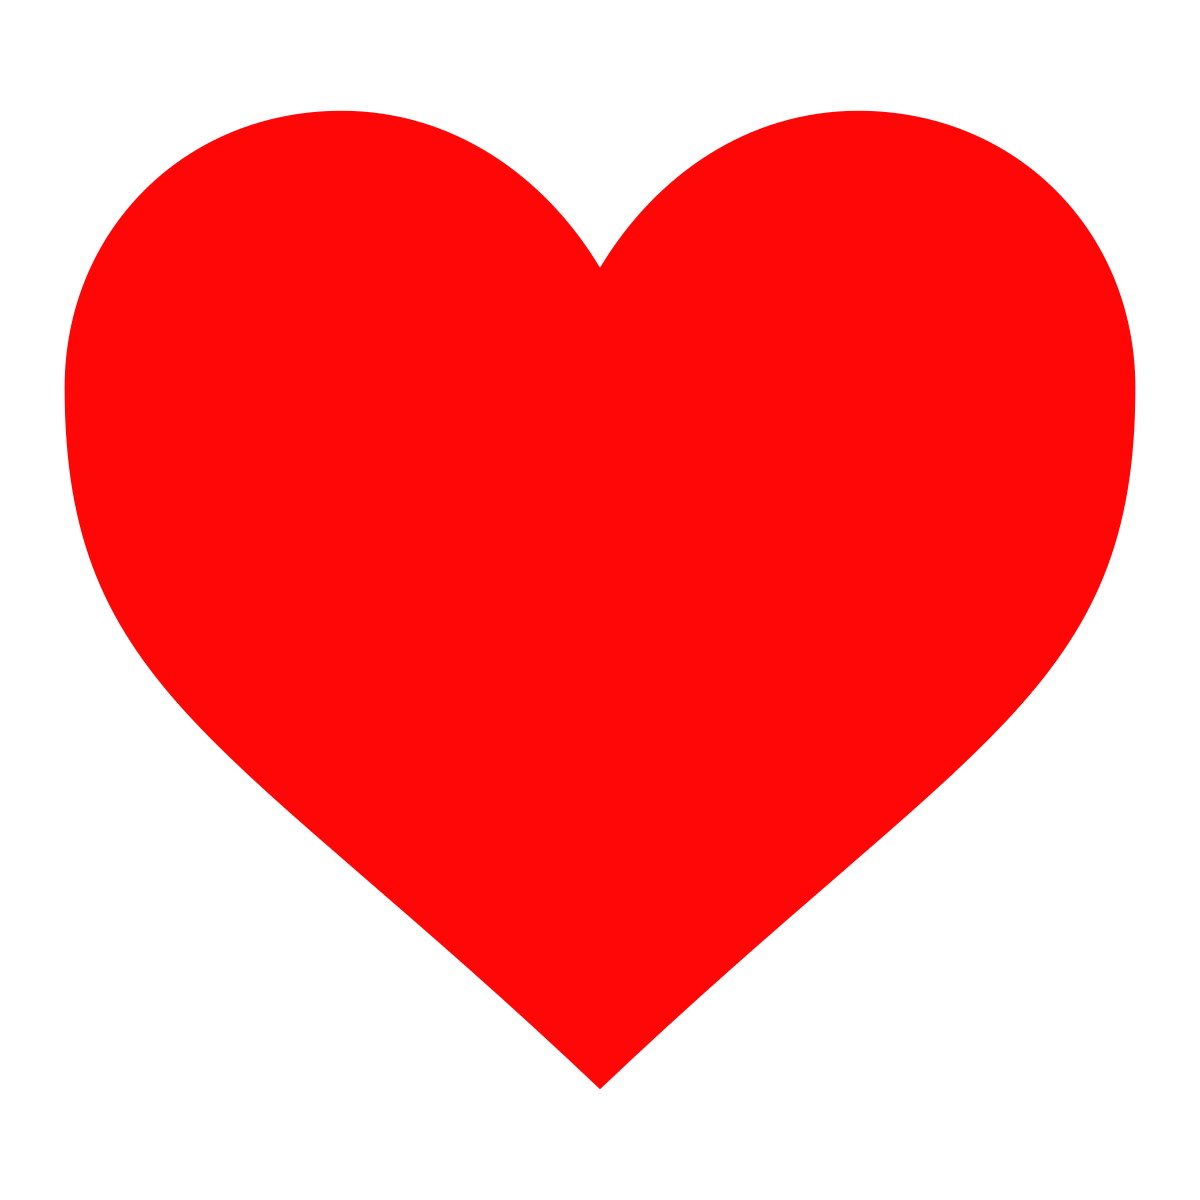 Heart Vector PNG Photo